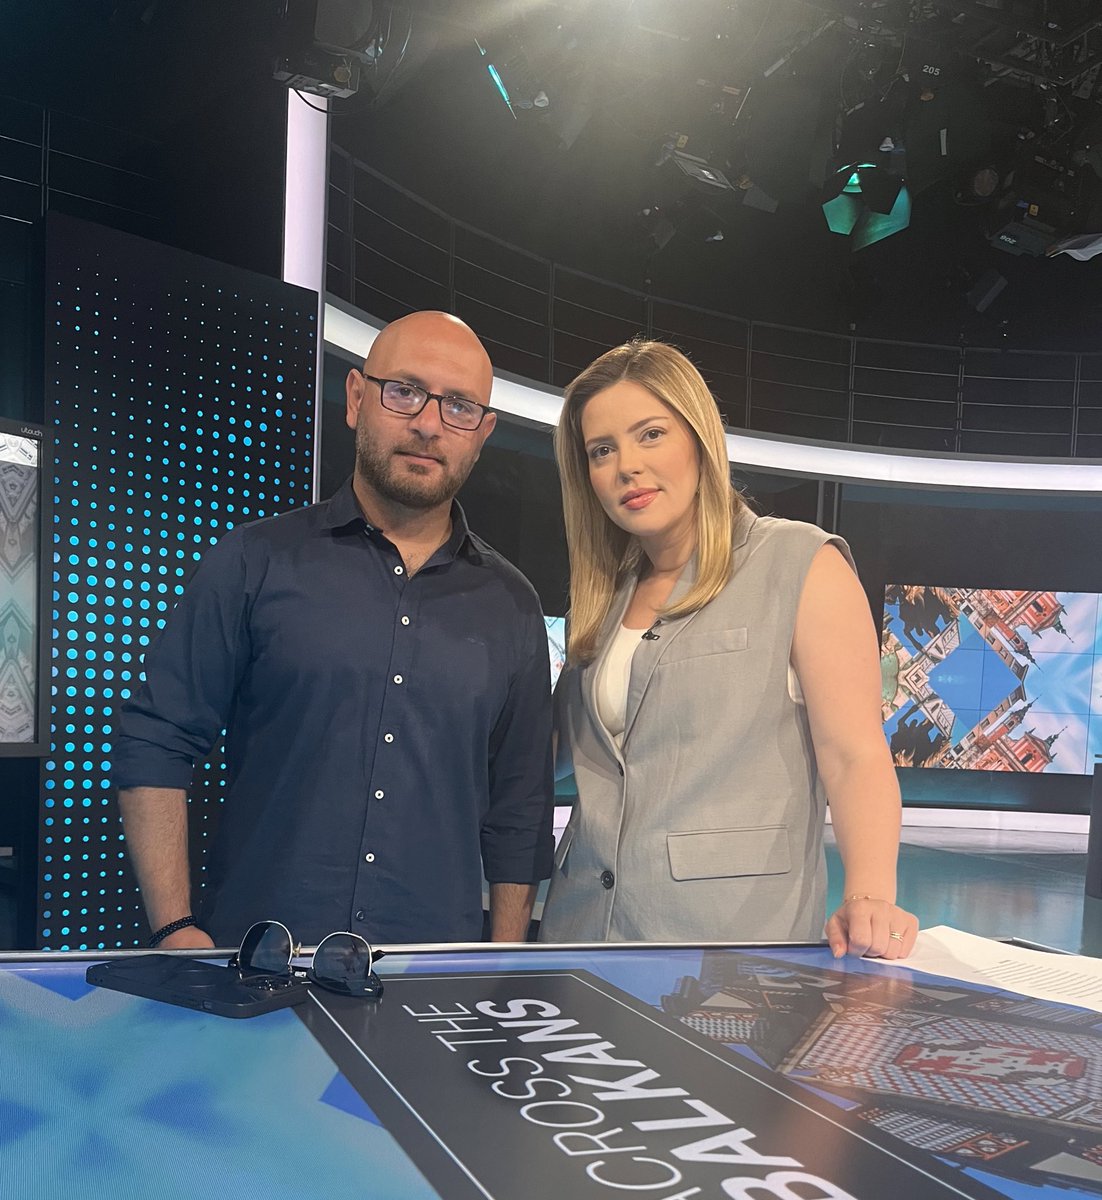 A Palestinian 🇵🇸and Bosnian 🇧🇦journalists on set in Istanbul🇹🇷. Thank you @nizar_sadawi for your reporting from #Gaza. Us Bosnians know how important is to have the truth told to the world and what it means to have brave journalists on the ground. #ceasefirenow